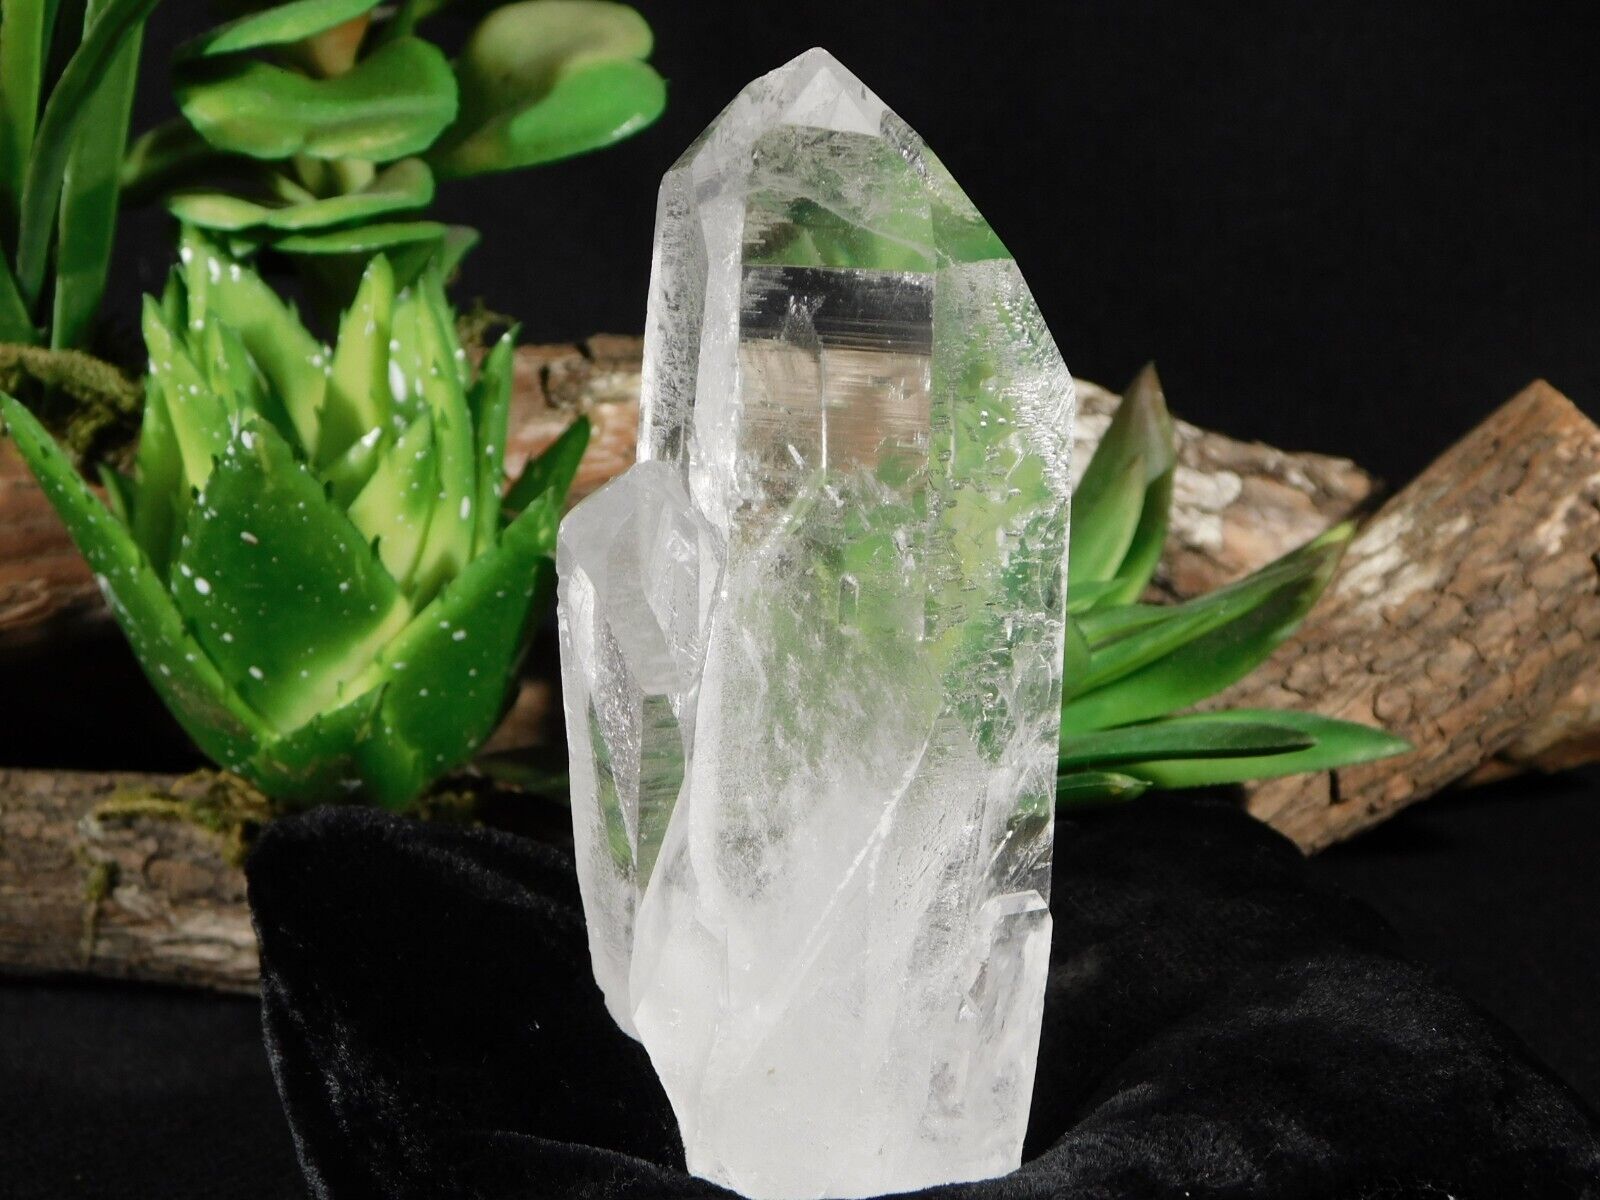 Larger VERY Translucent Quartz Crystal TWIN From Brazil 193gr